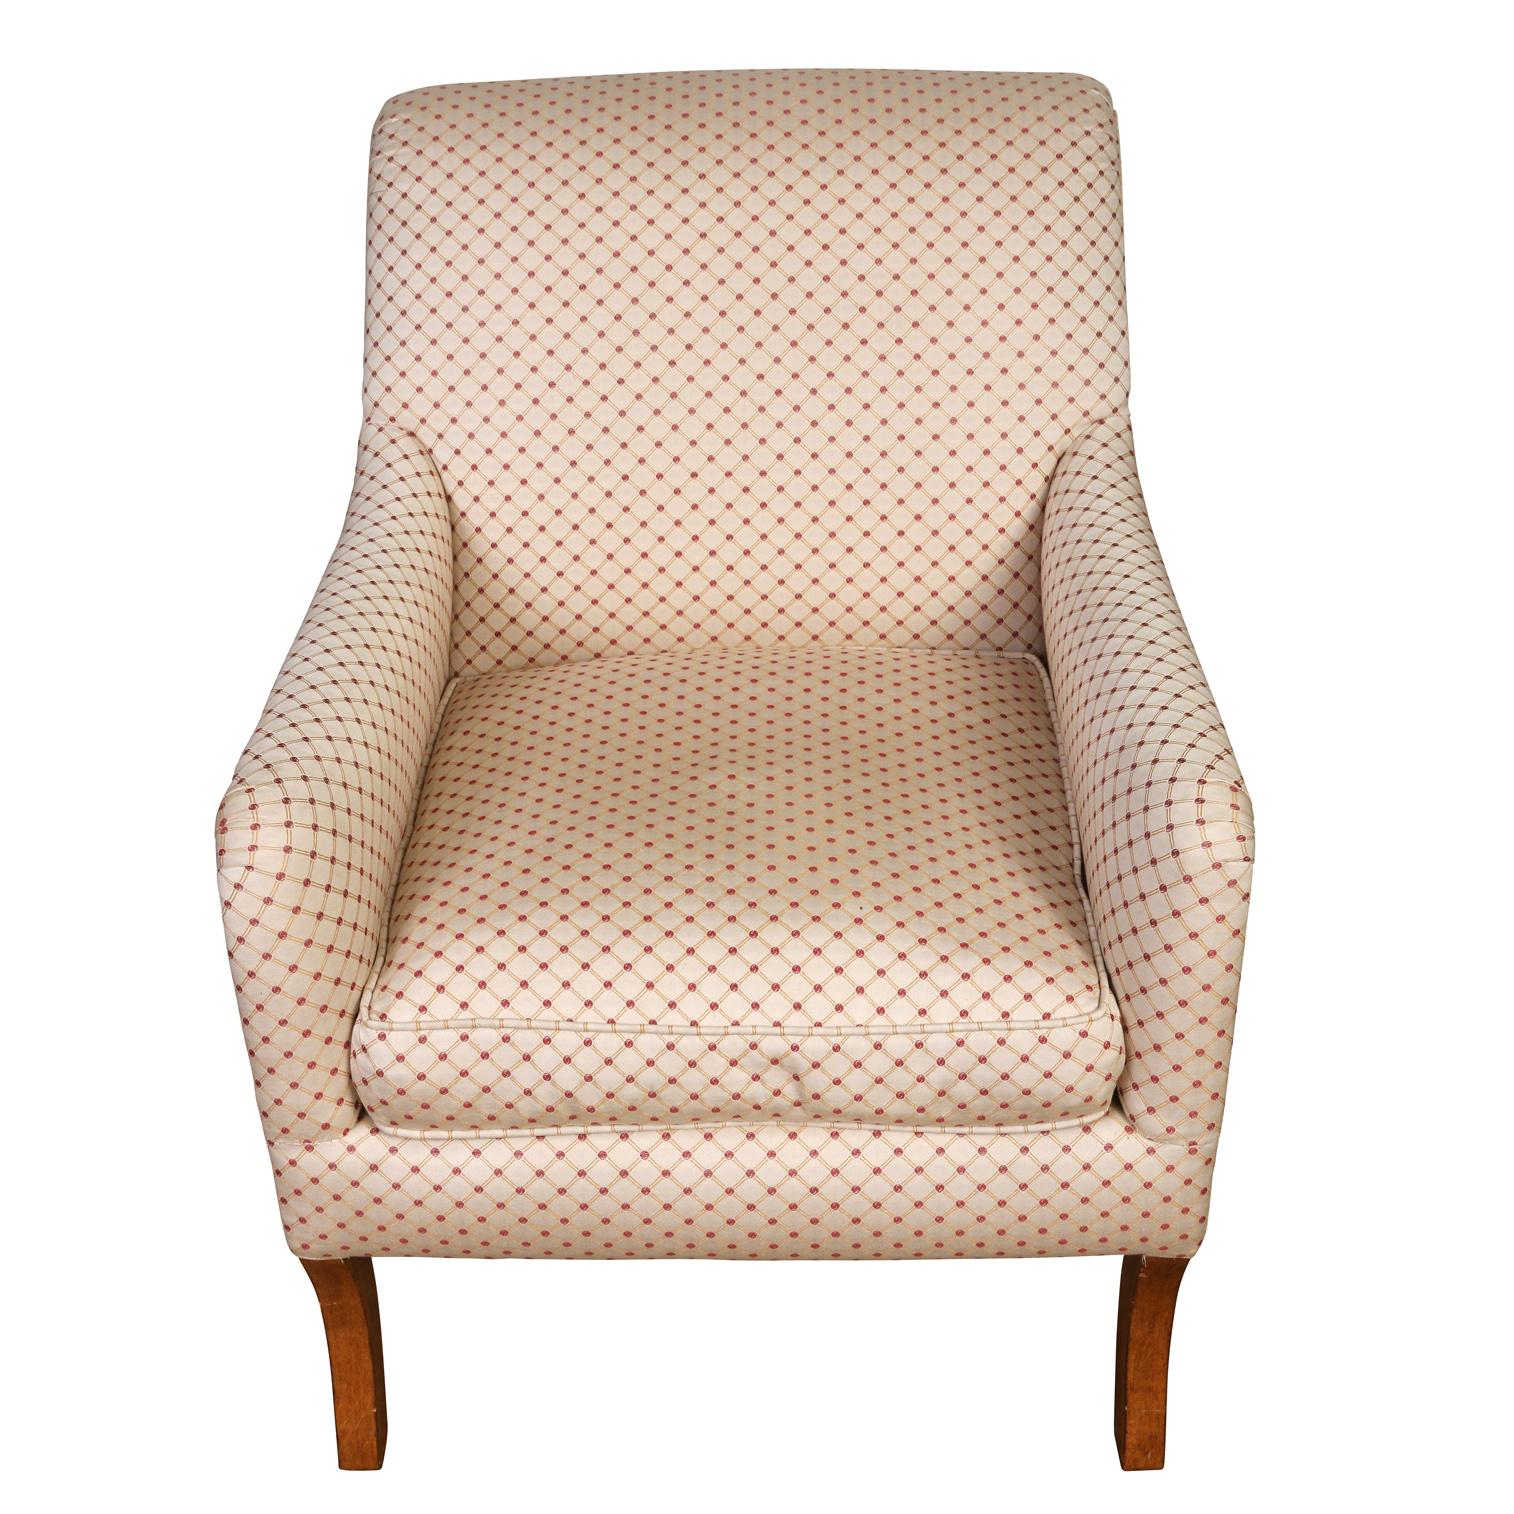 Vintage Upholstered Diamond Print Club Chair, A. Rudin In Good Condition For Sale In Locust Valley, NY